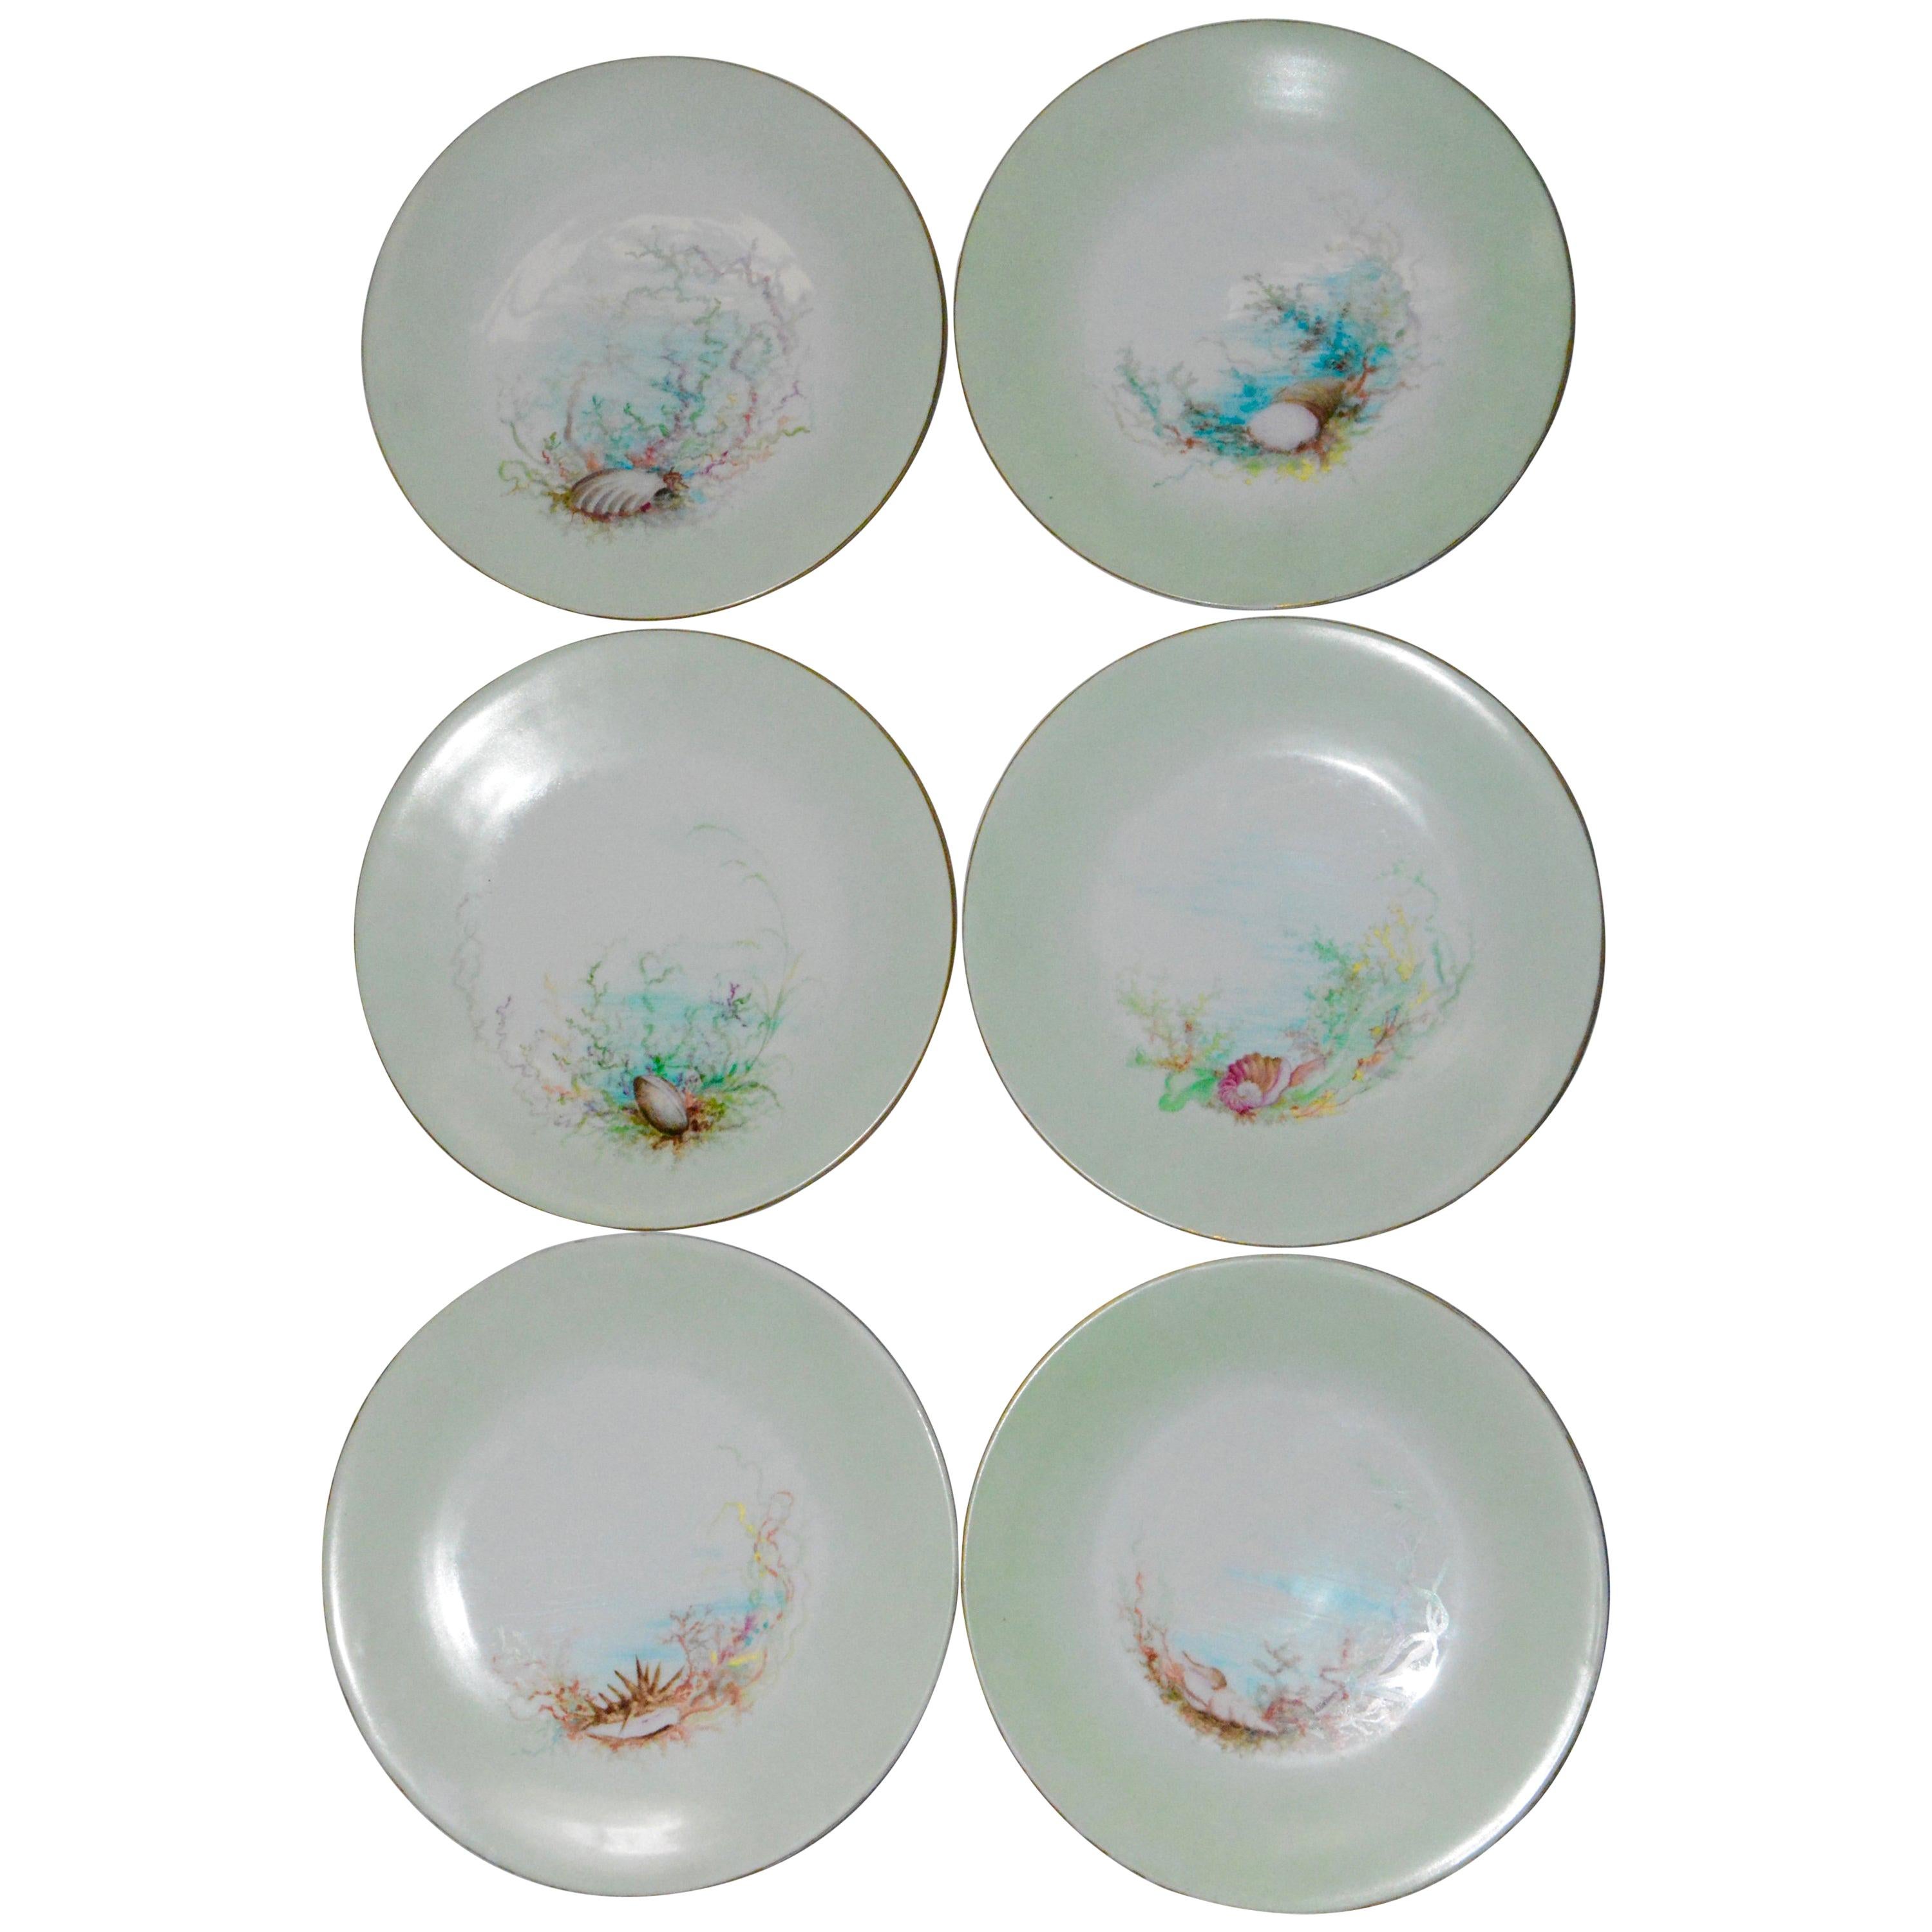 Limoges T & V French Plates with Seashell Paintings by M.H. Dismukes in 1898 For Sale